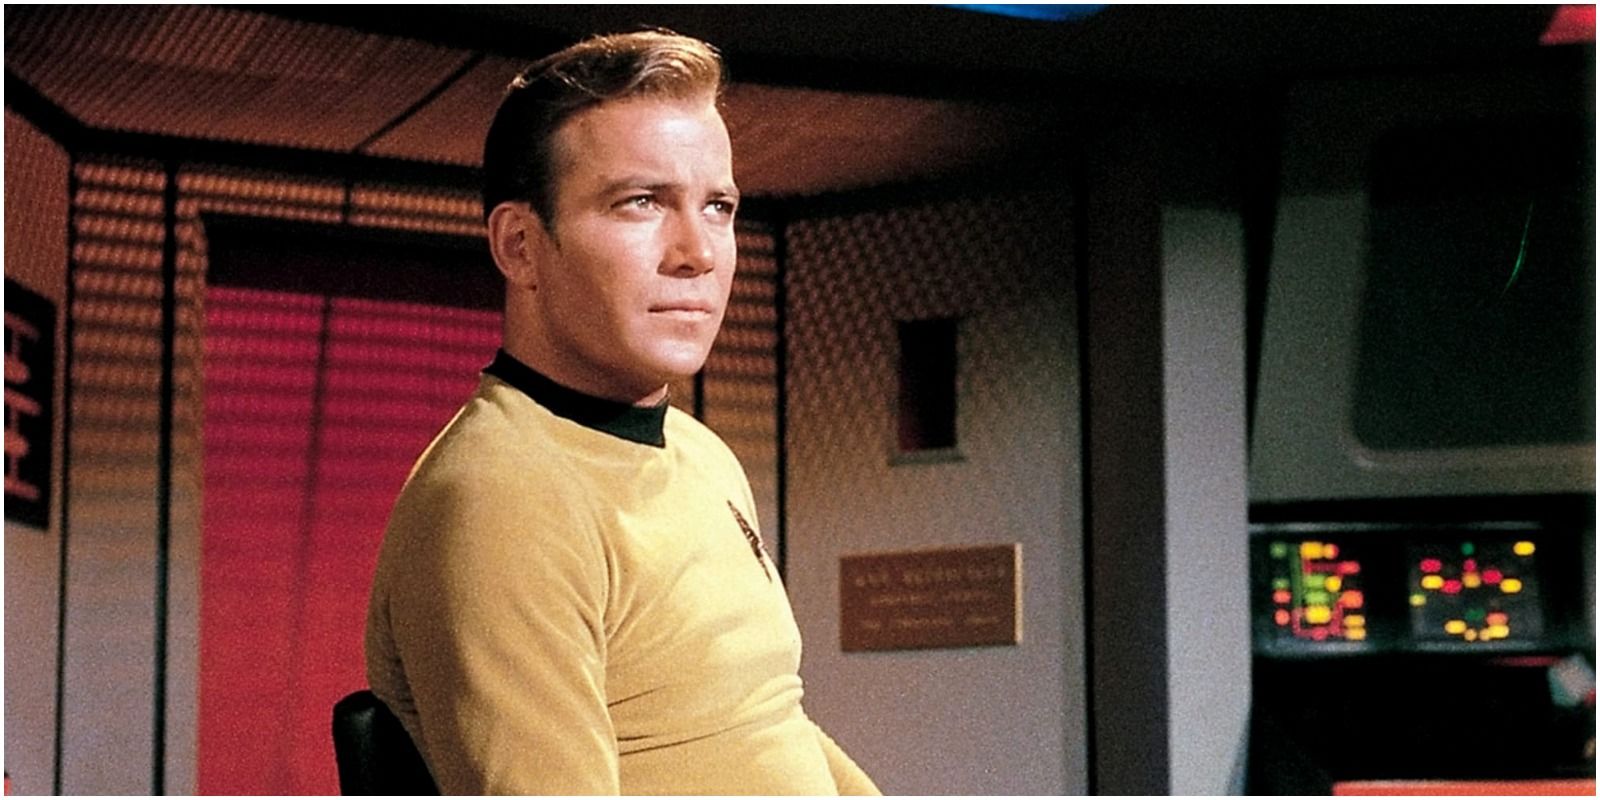 Captain Kirk aboard his ship, the Enterprise, from TOS